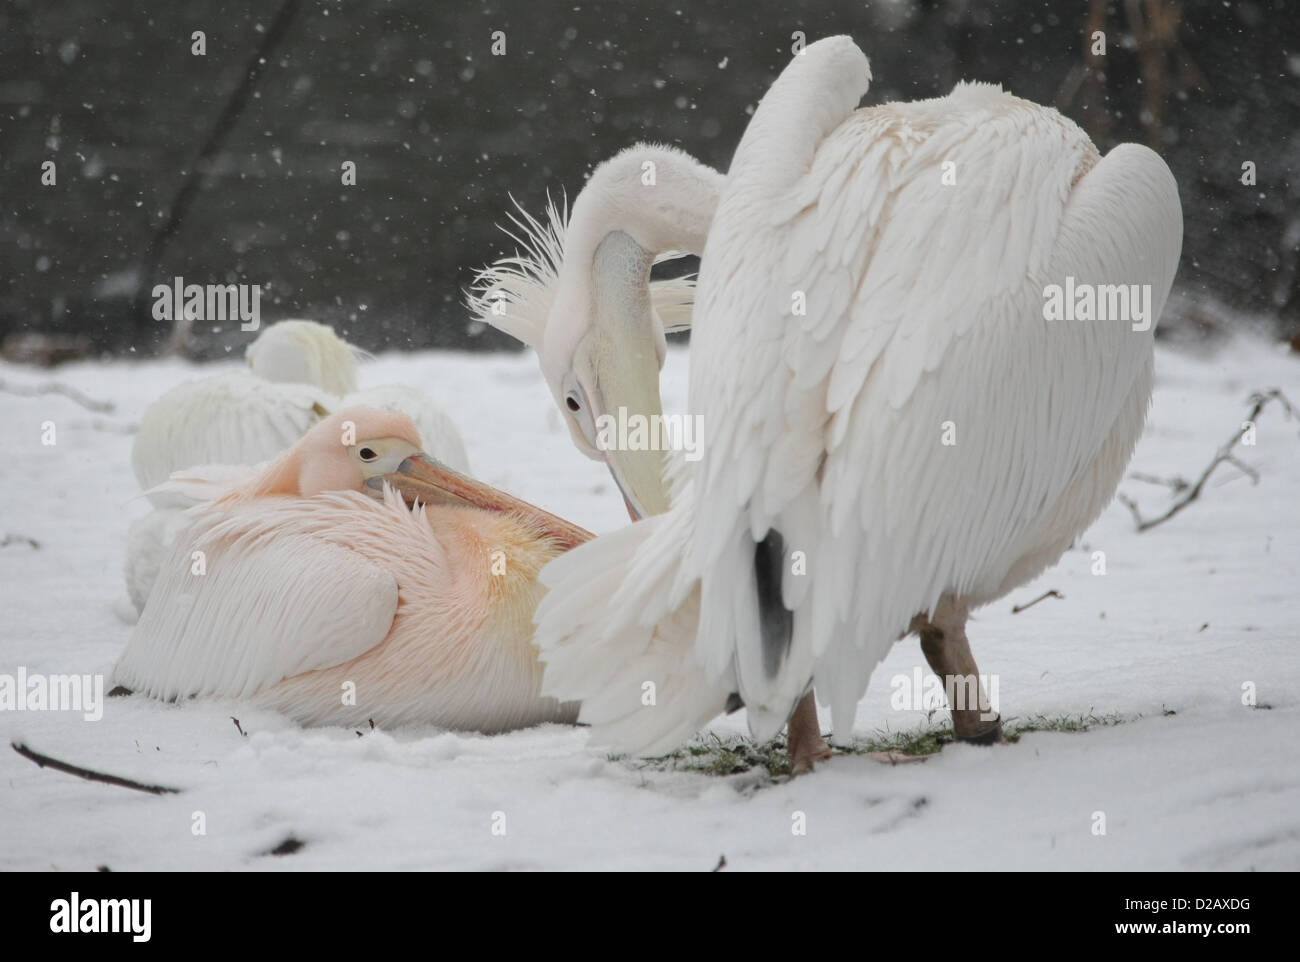 THE AMBASSADOR'S PELICANS IN THE SNOW GENERAL SNOW VIEWS AROUND LONDON LONDON ENGLAND UK 18 January 2013 Stock Photo